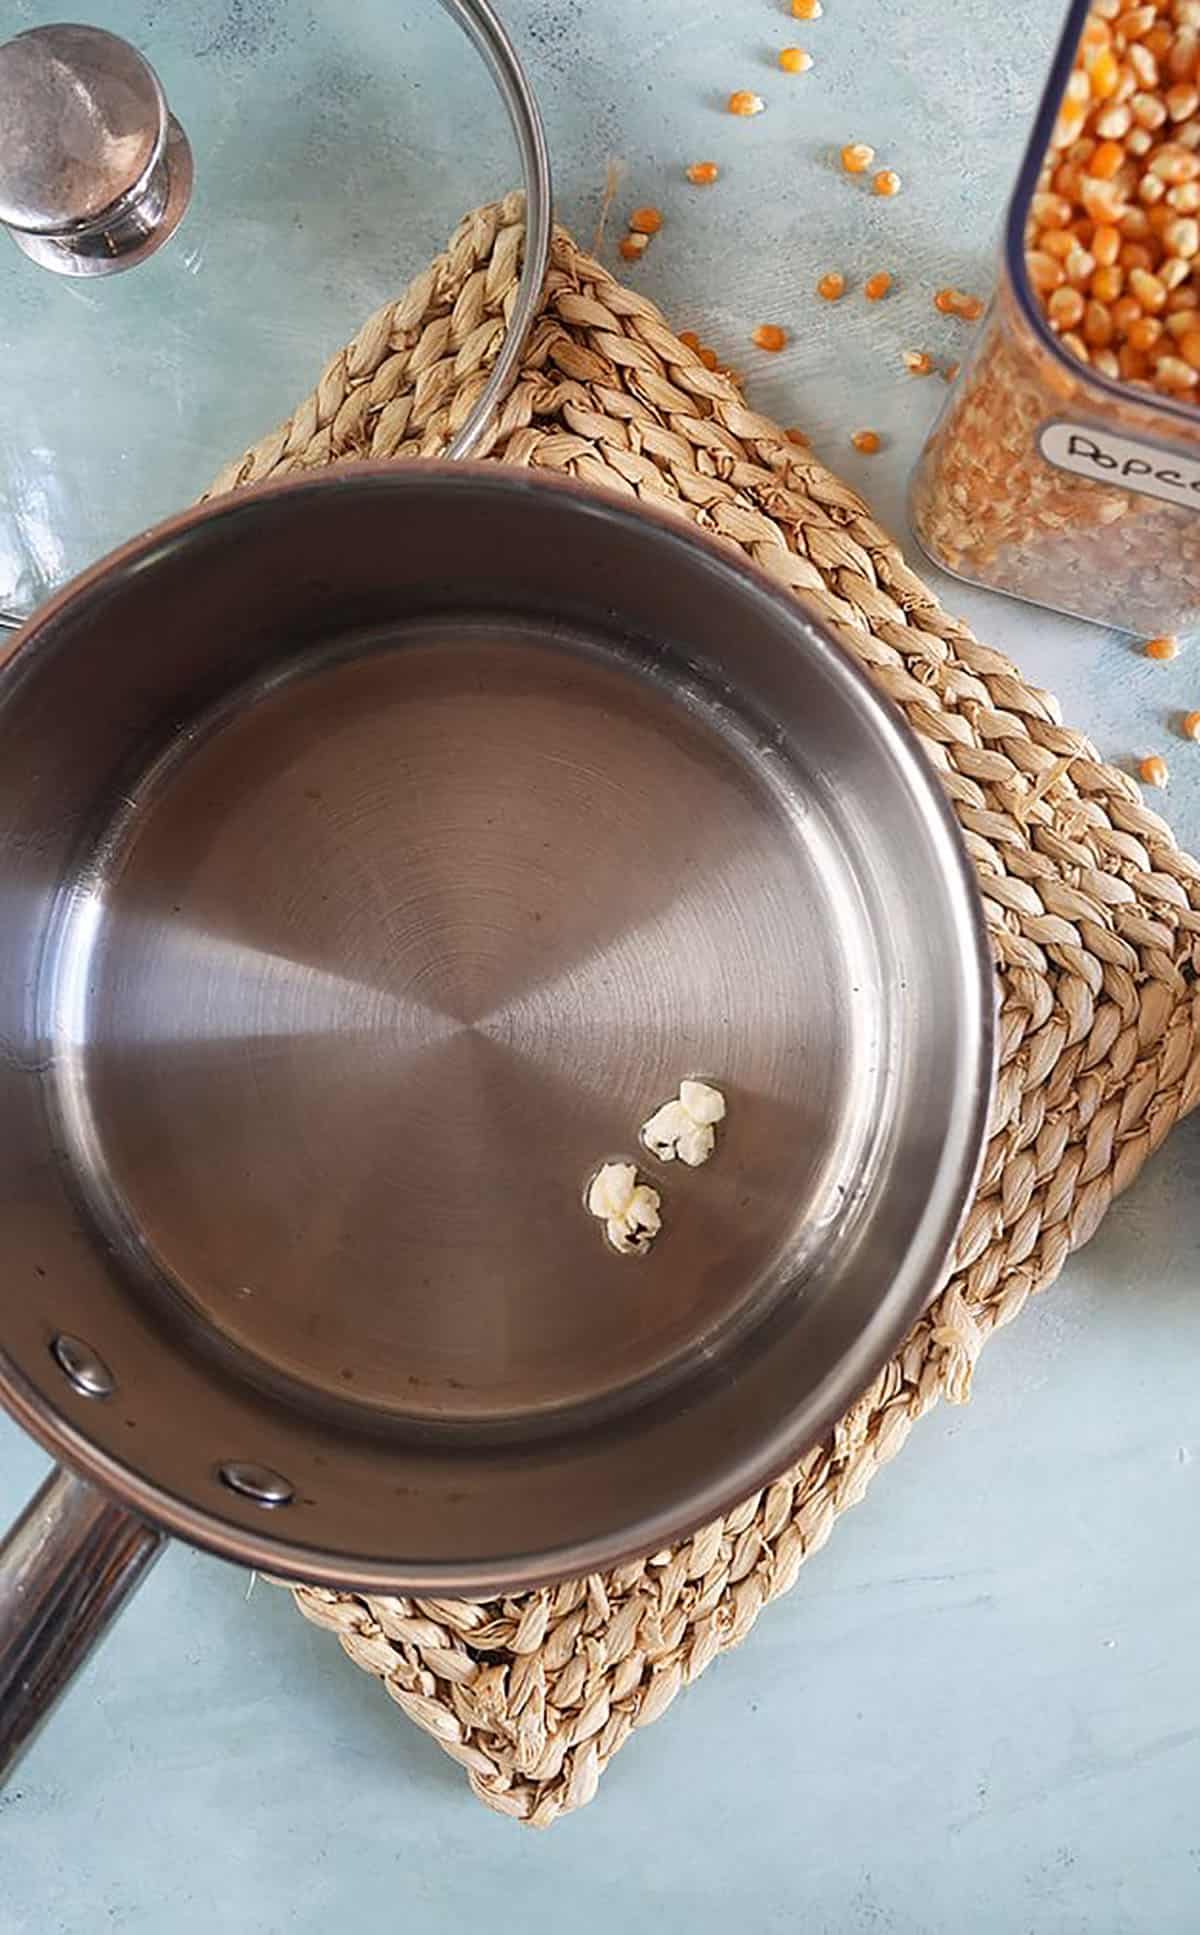 Two popcorn pieces in a pot of oil.